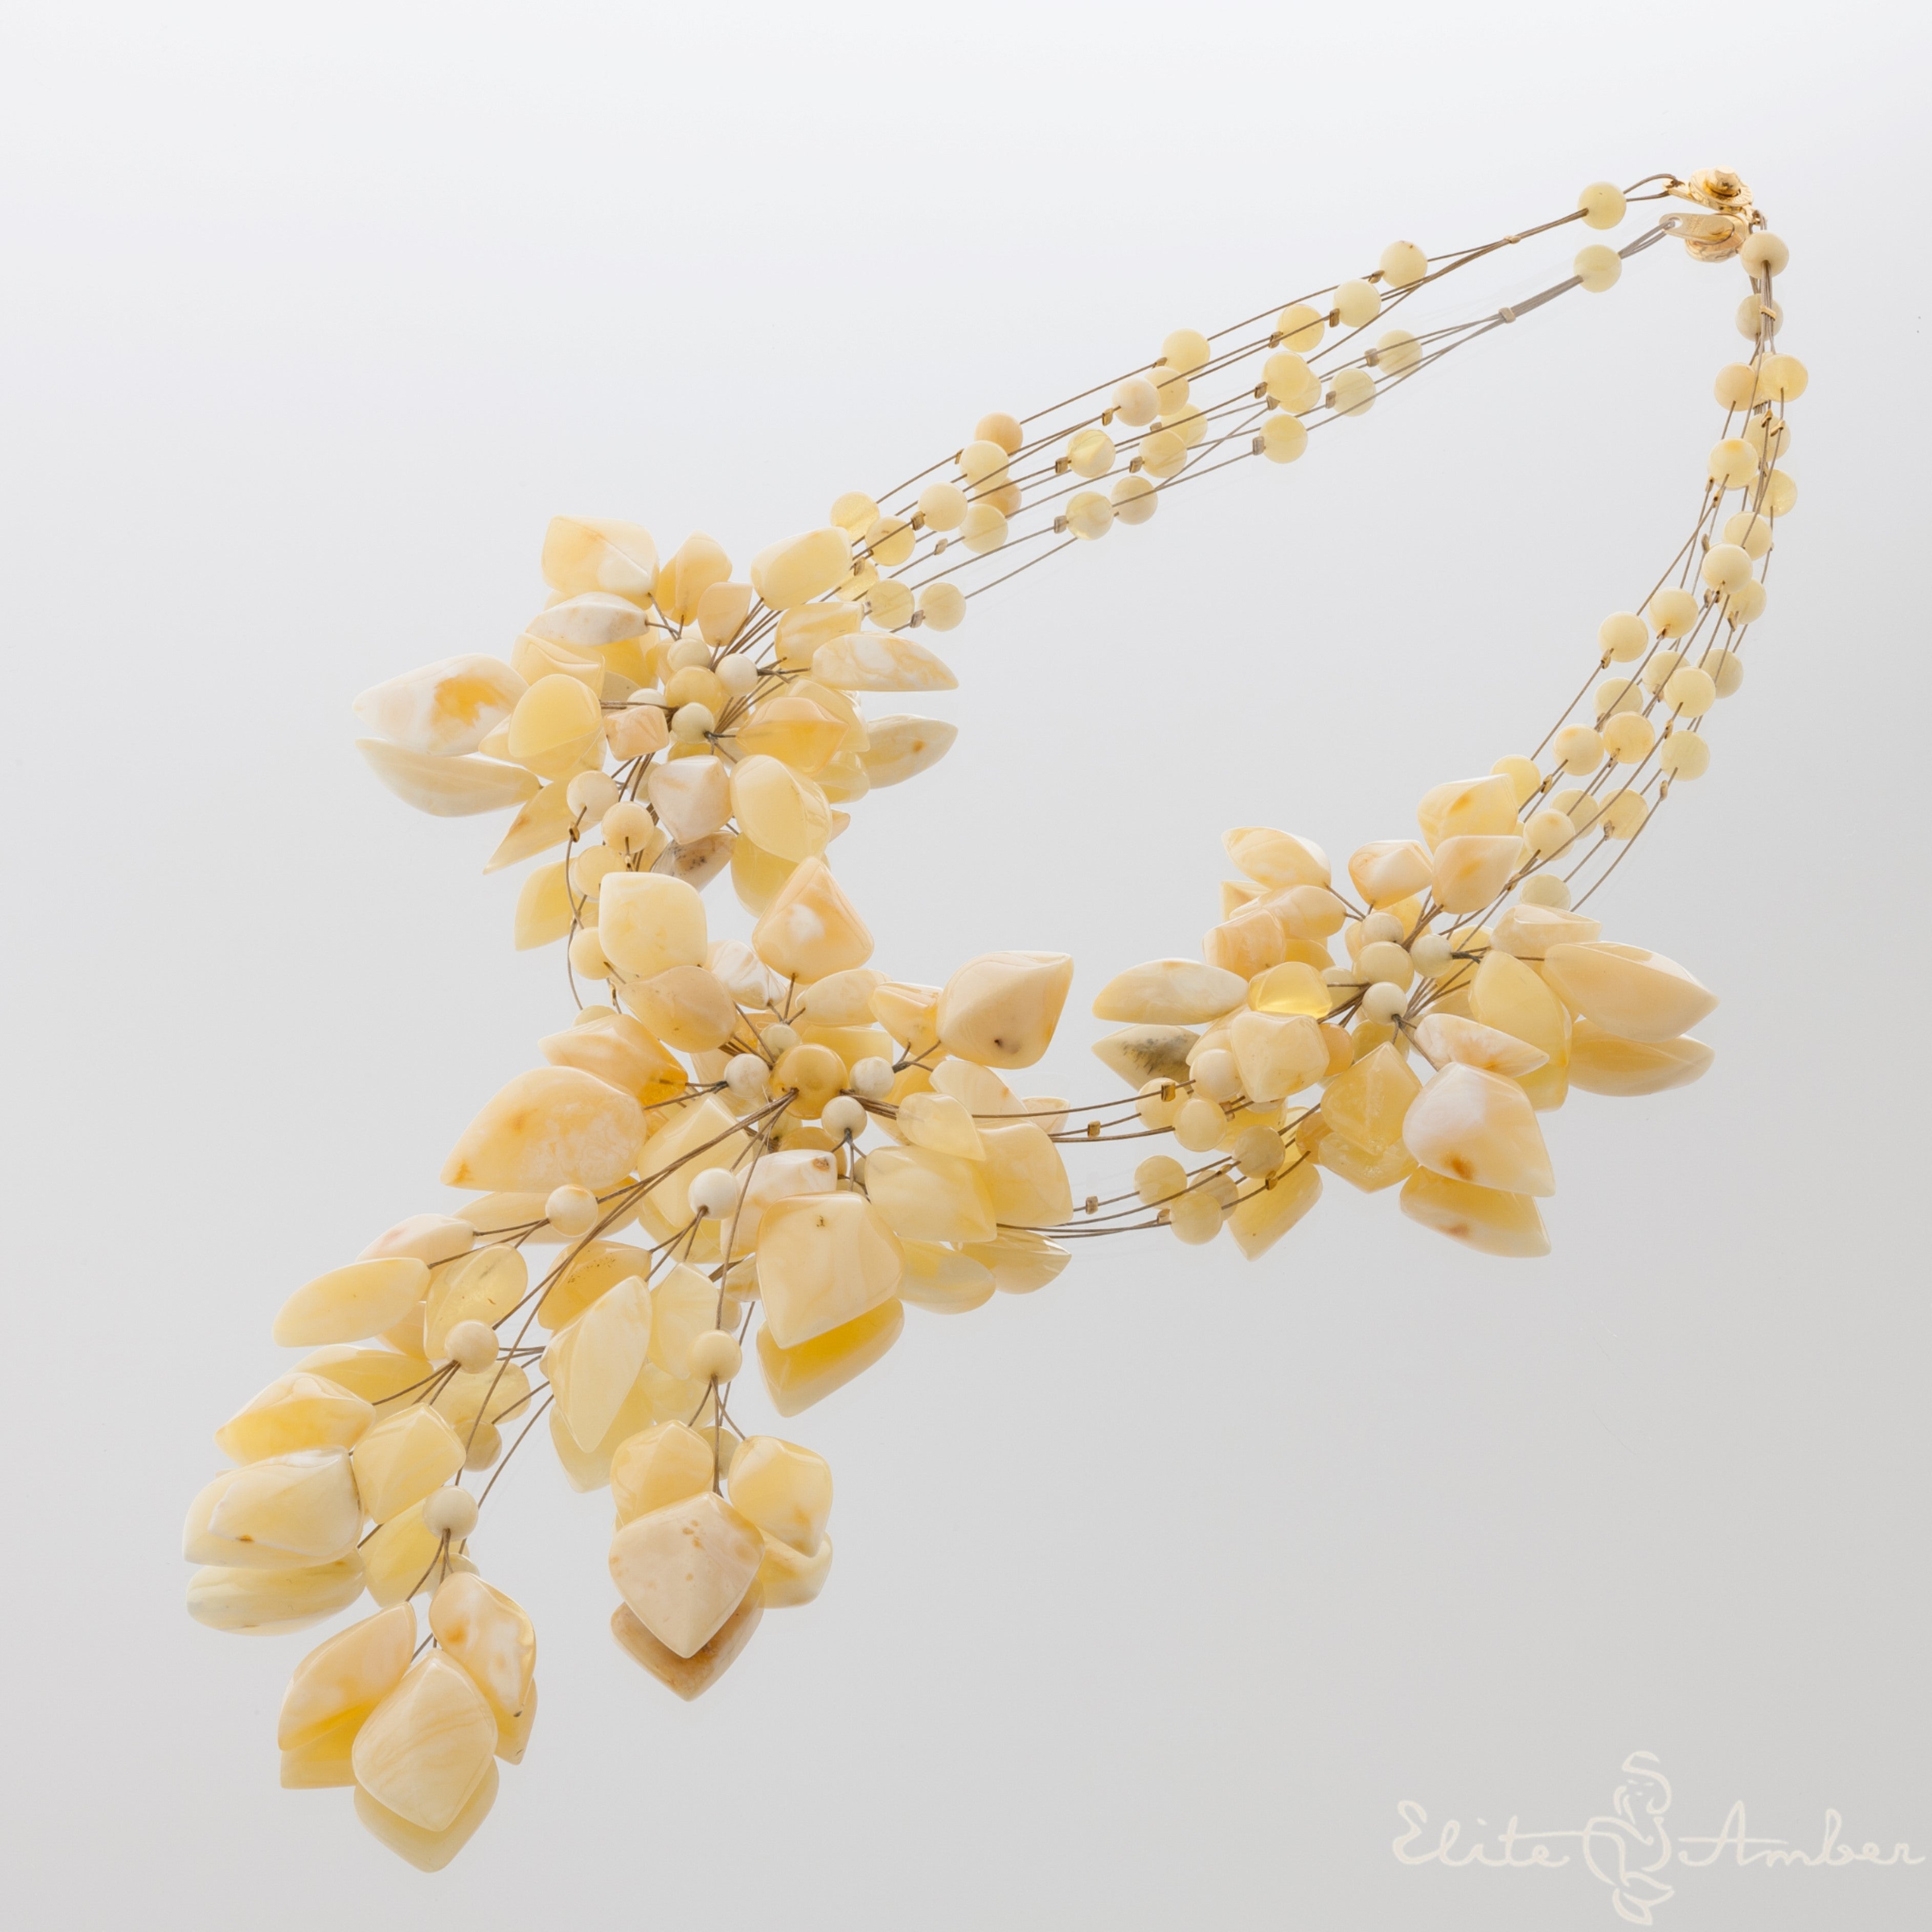 Amber necklace "White royal flowers"